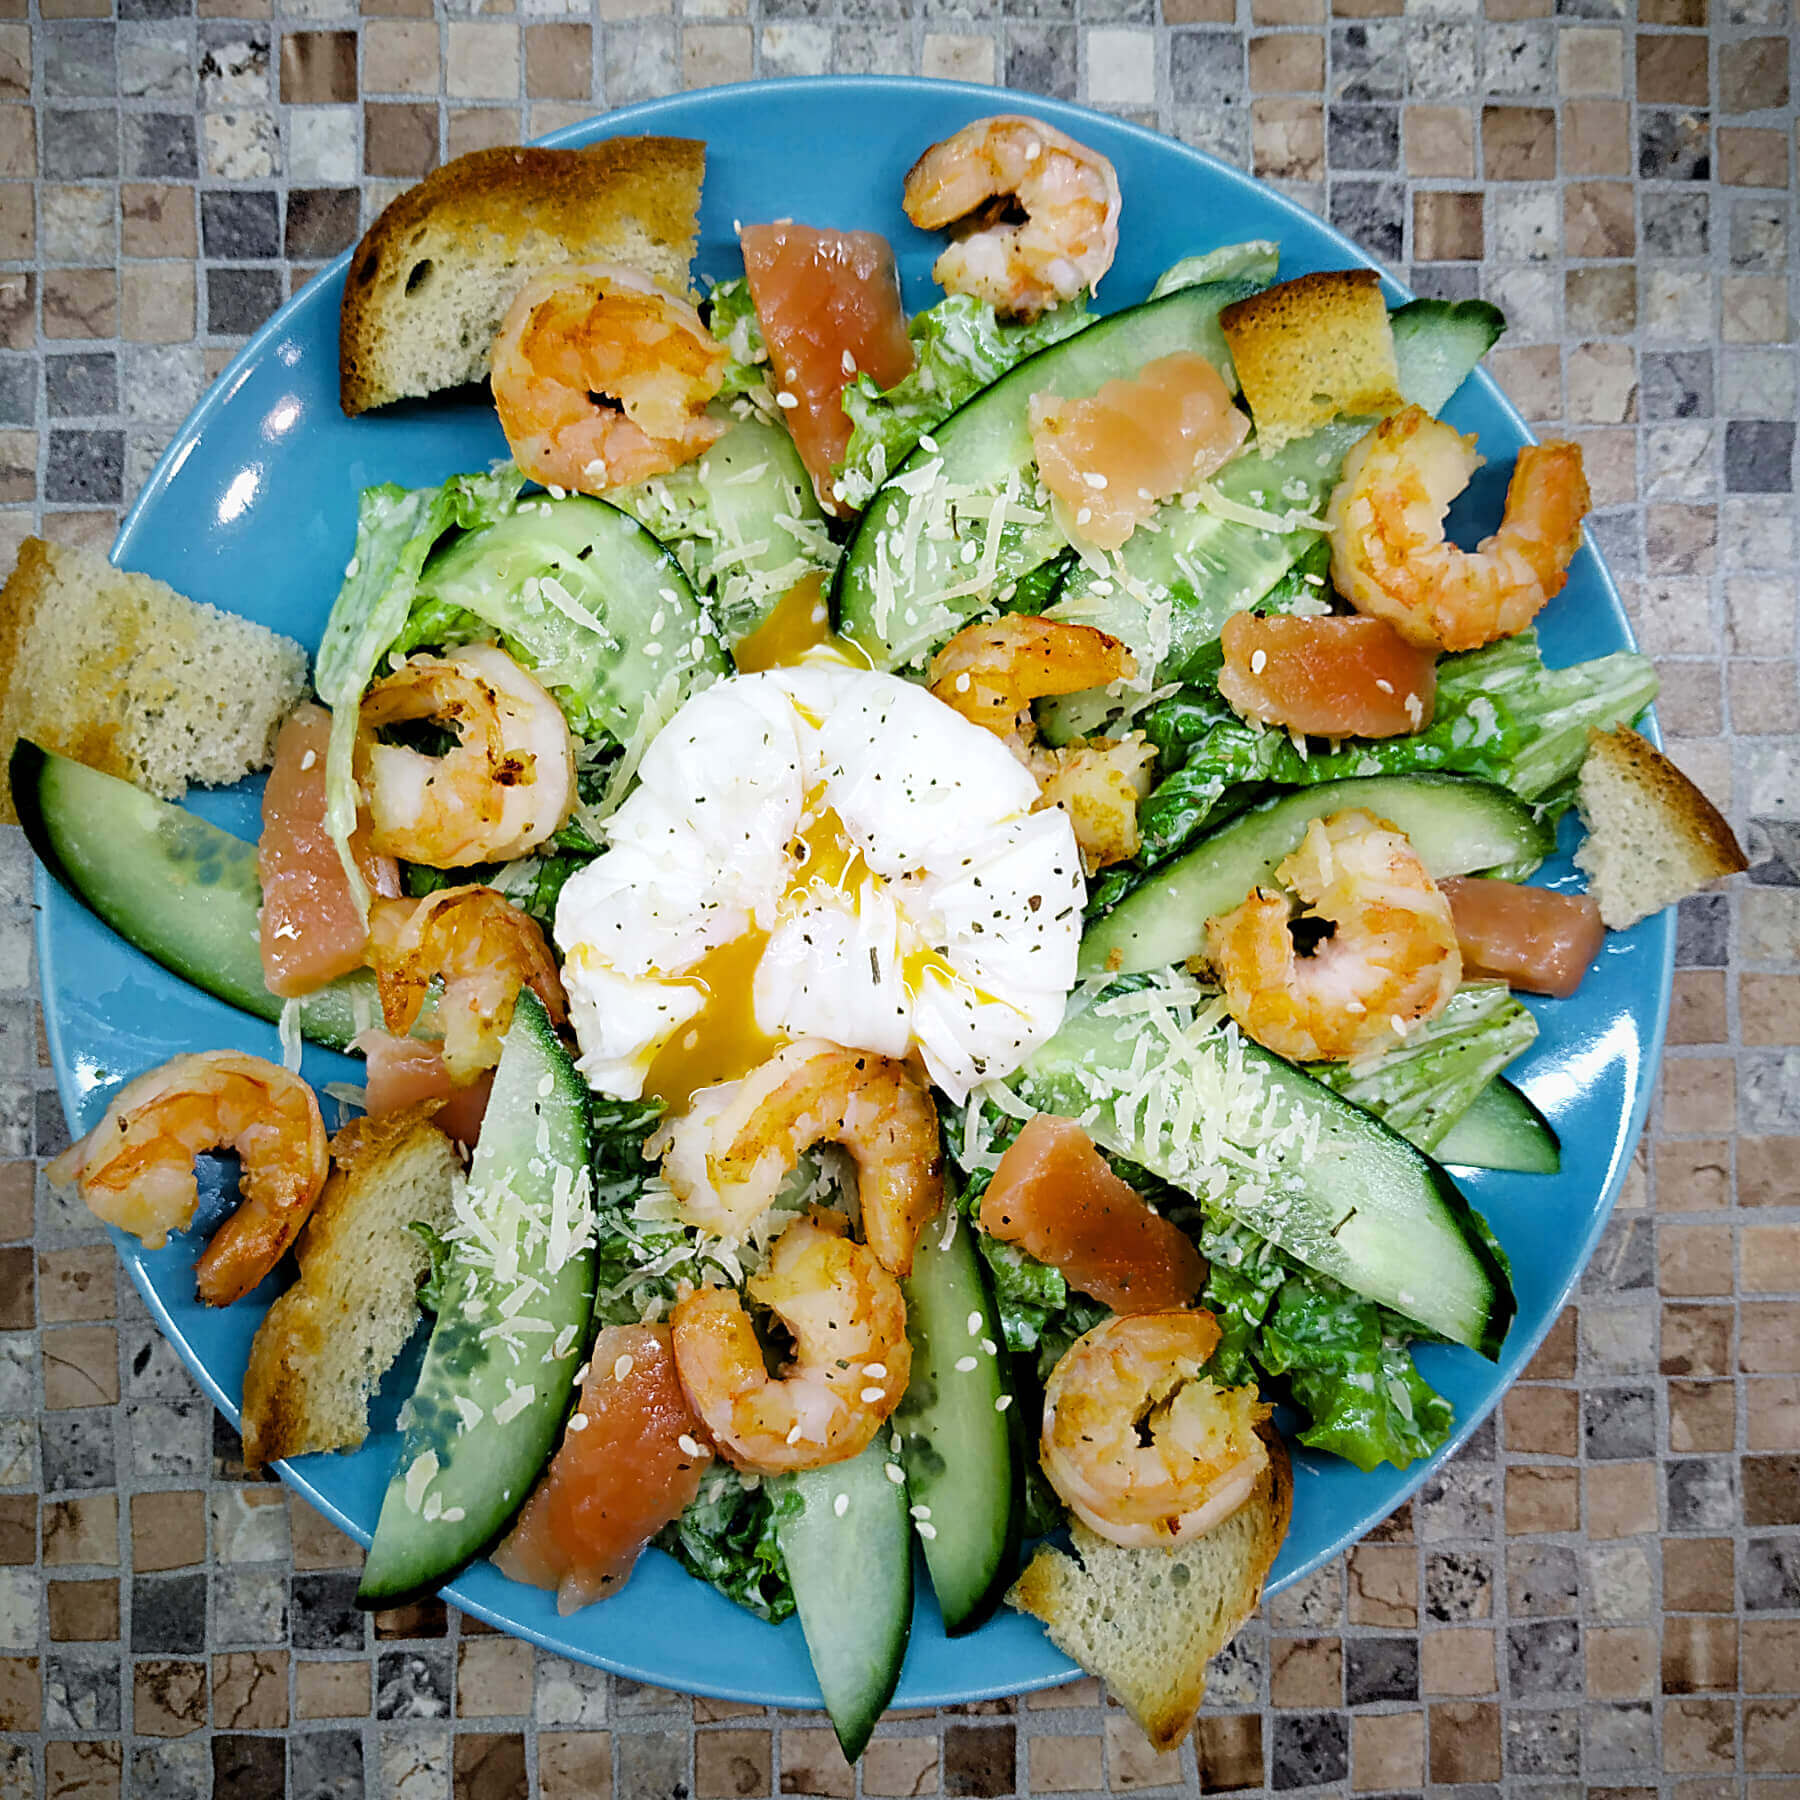 Shrimp salad with poached egg and salmon